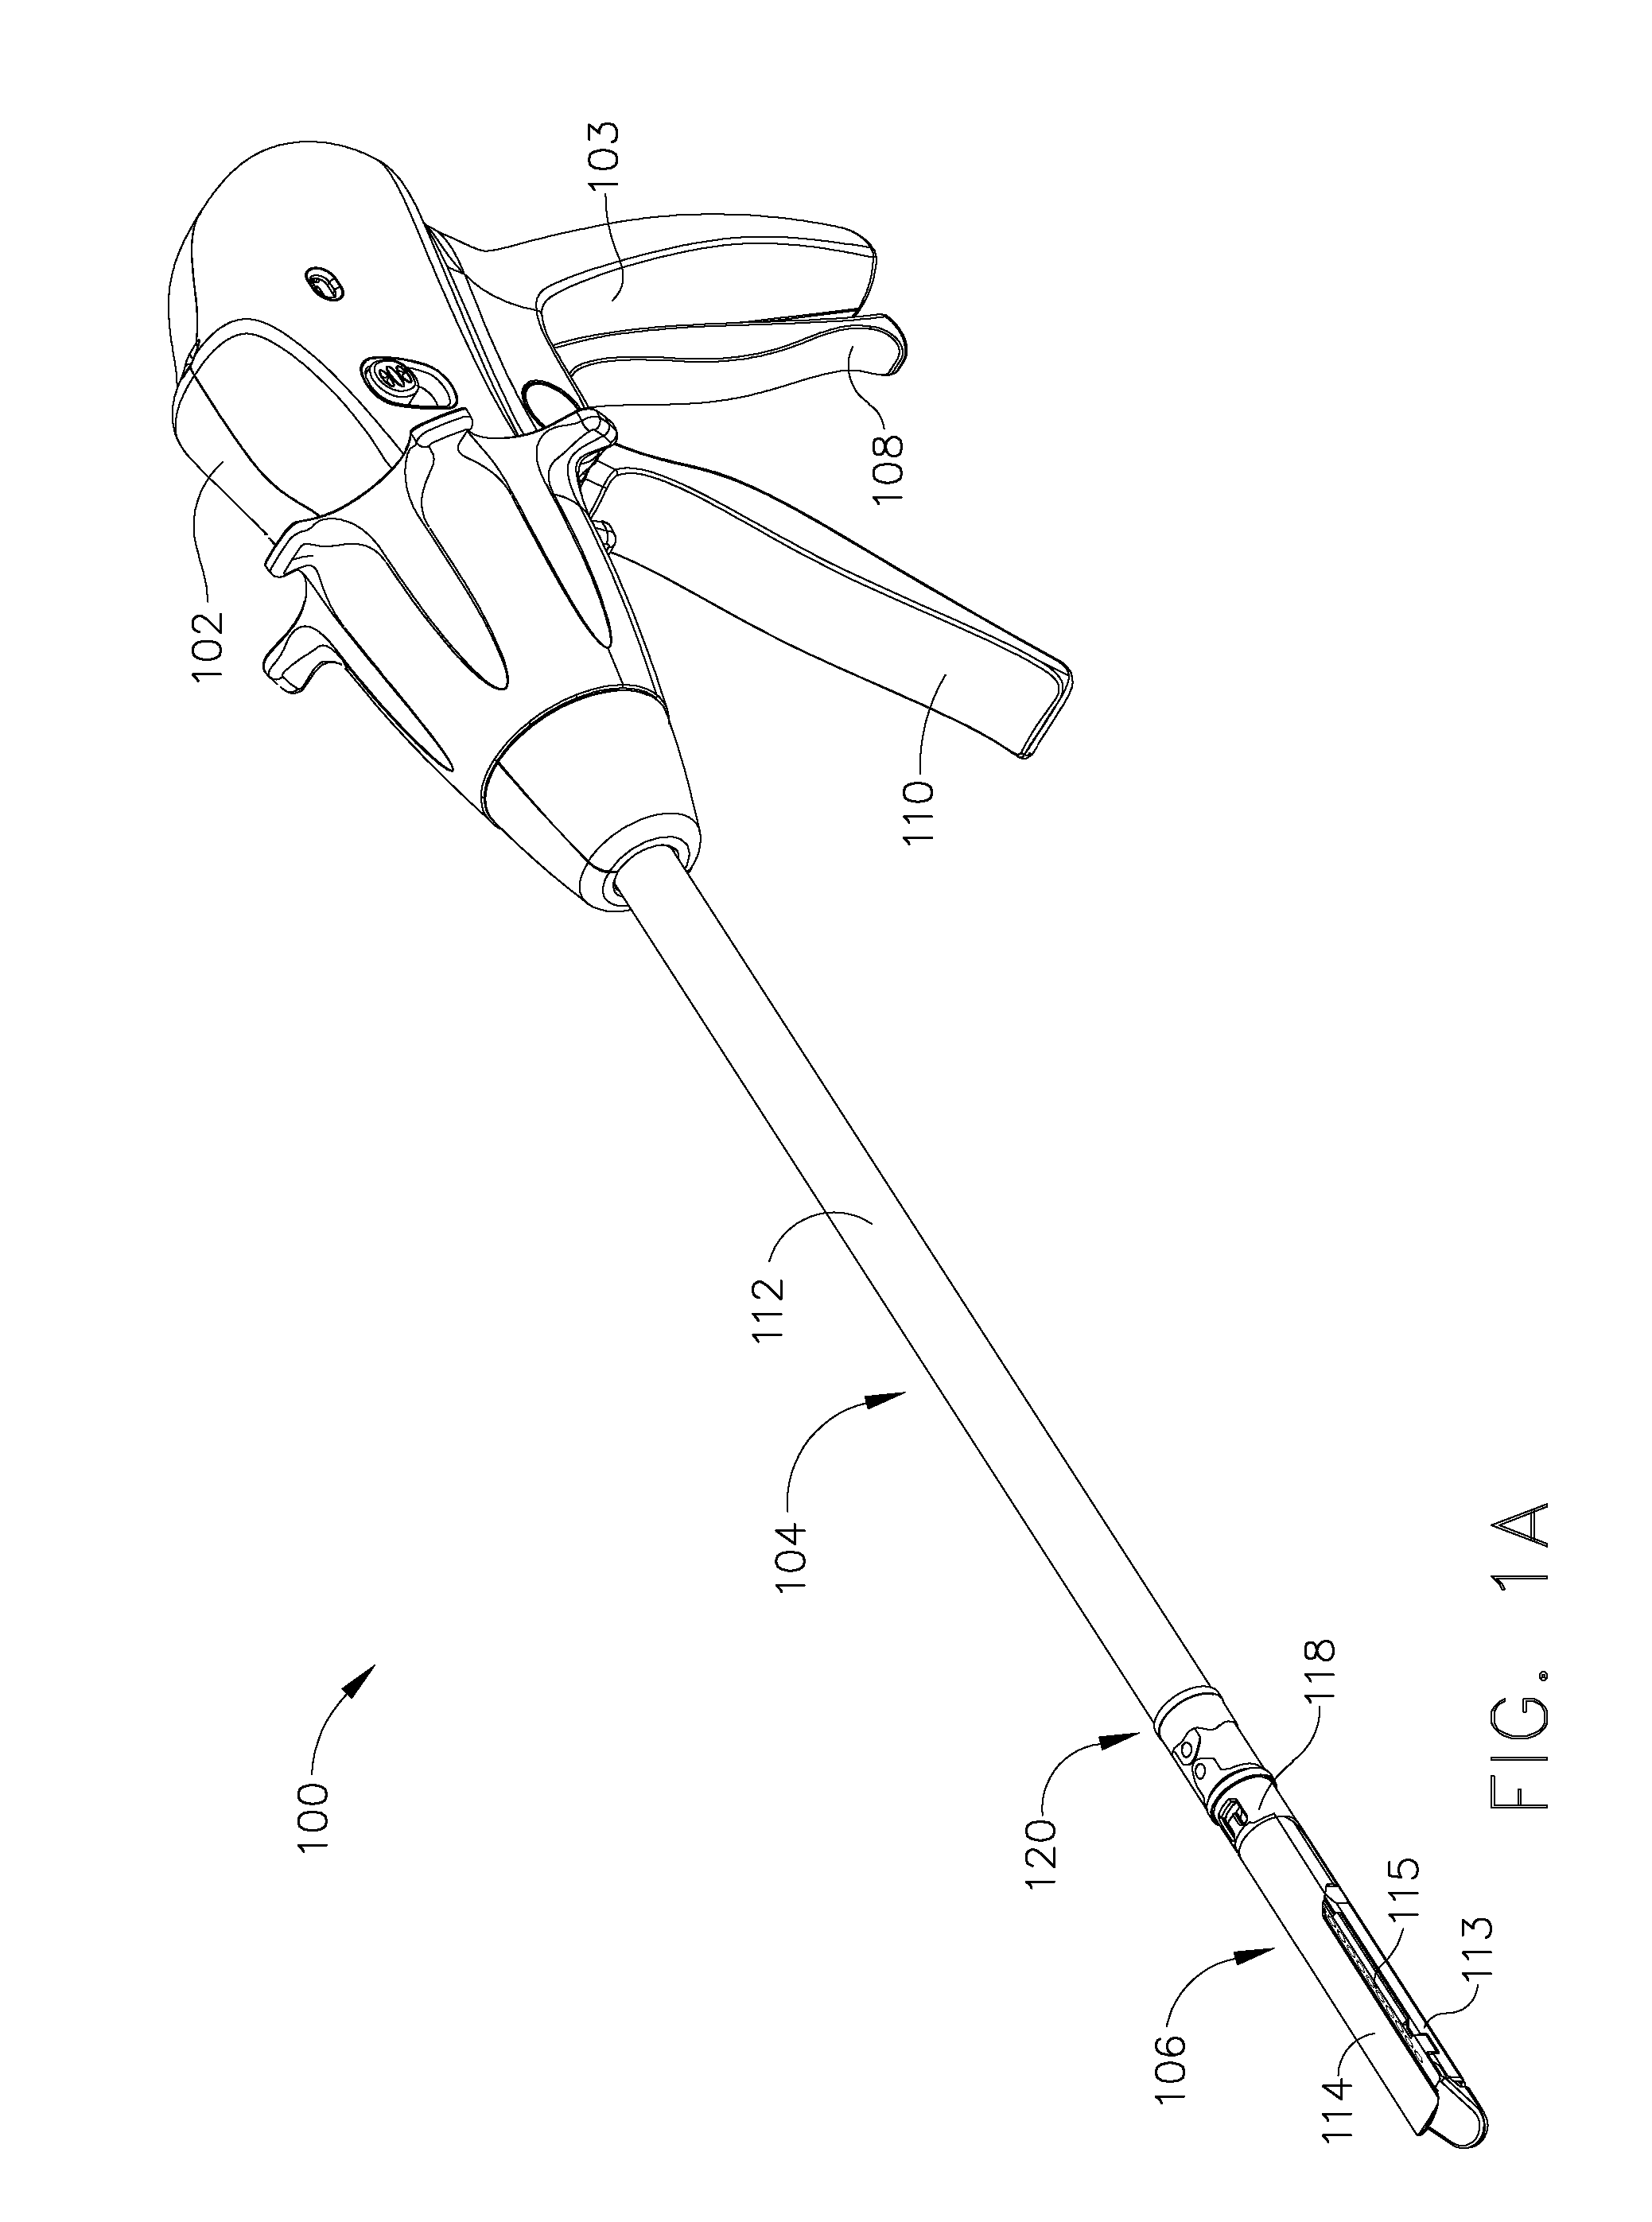 Surgical stapling instrument comprising a magnetic element driver